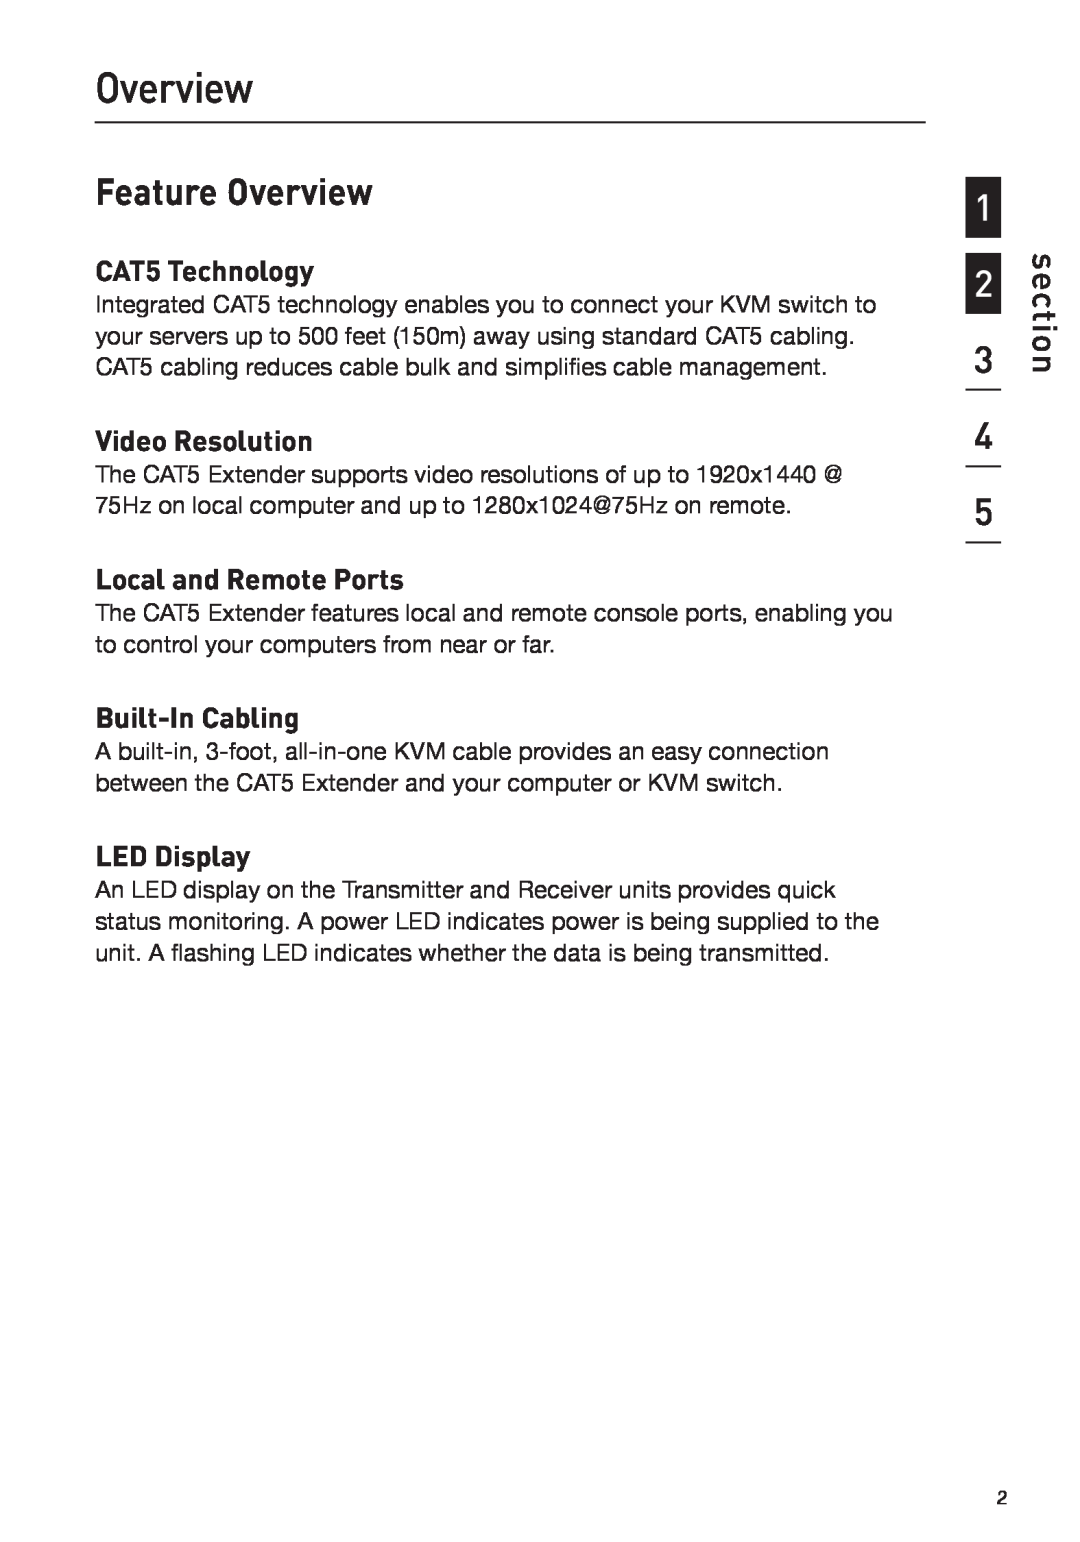 Belkin P75472-A manual Feature Overview, section 